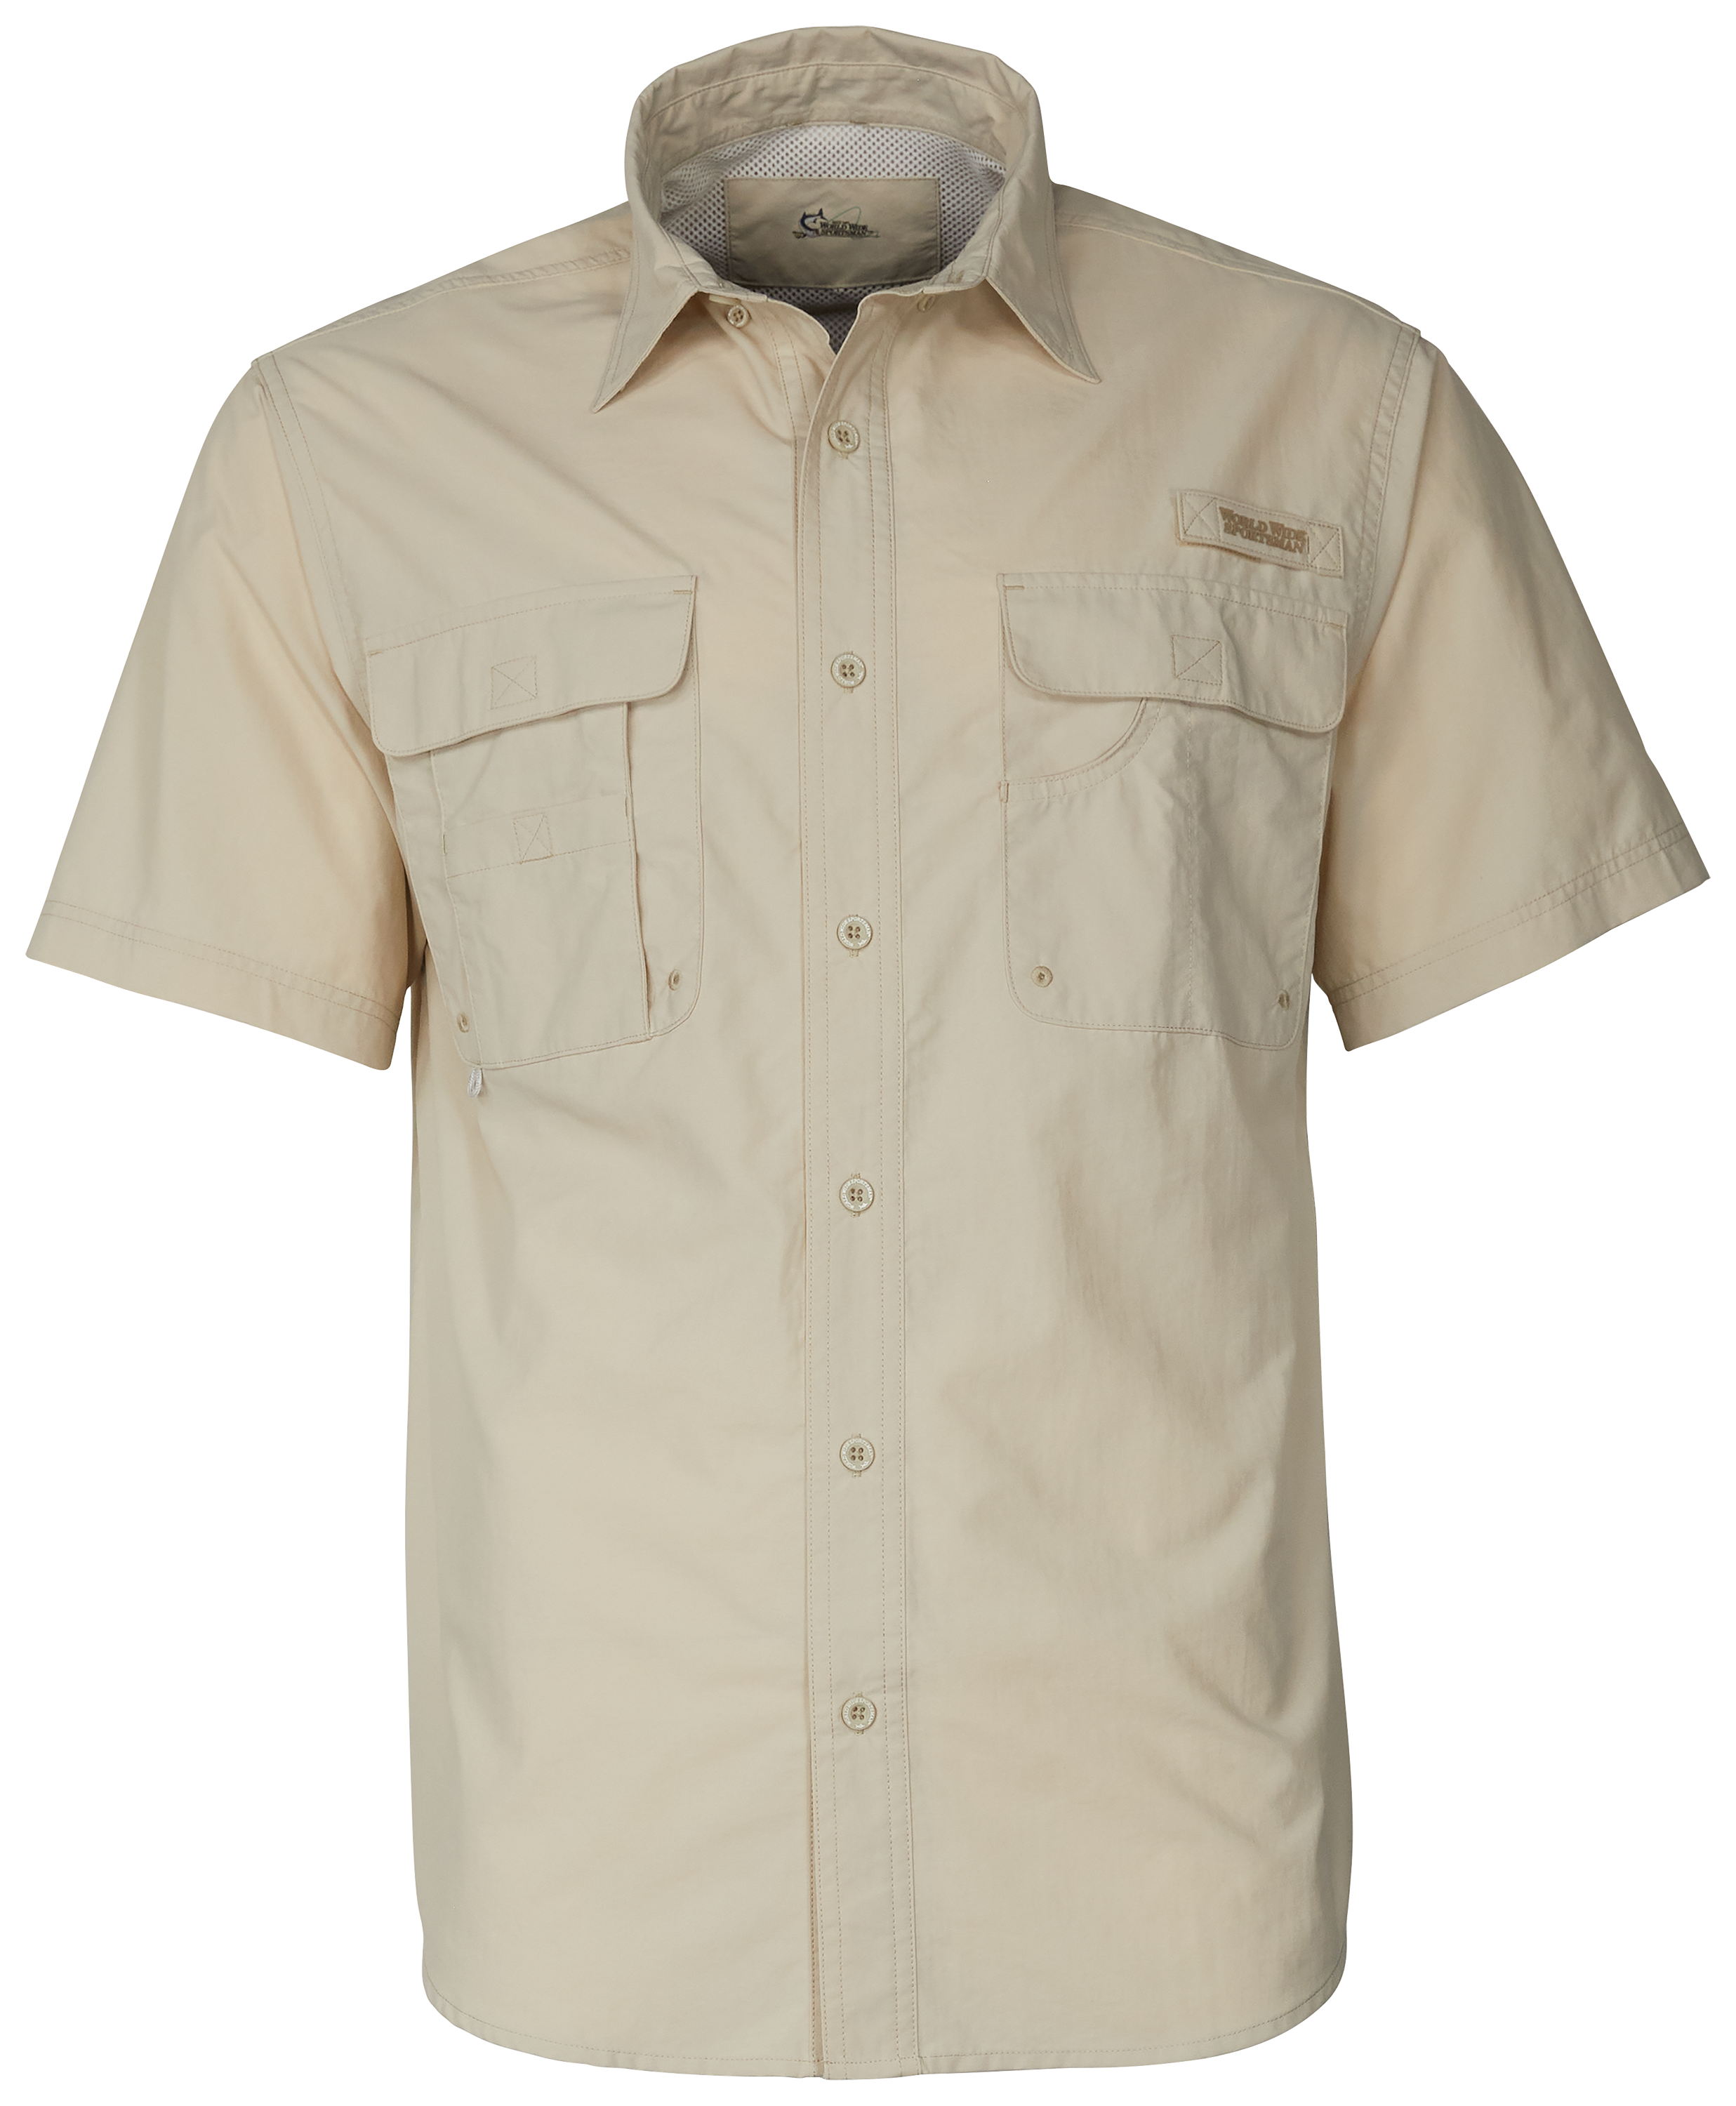 World Wide Sportsman Recycled-Nylon Angler 2.0 Short-Sleeve Button-Down Shirt for Men - Peyote - M